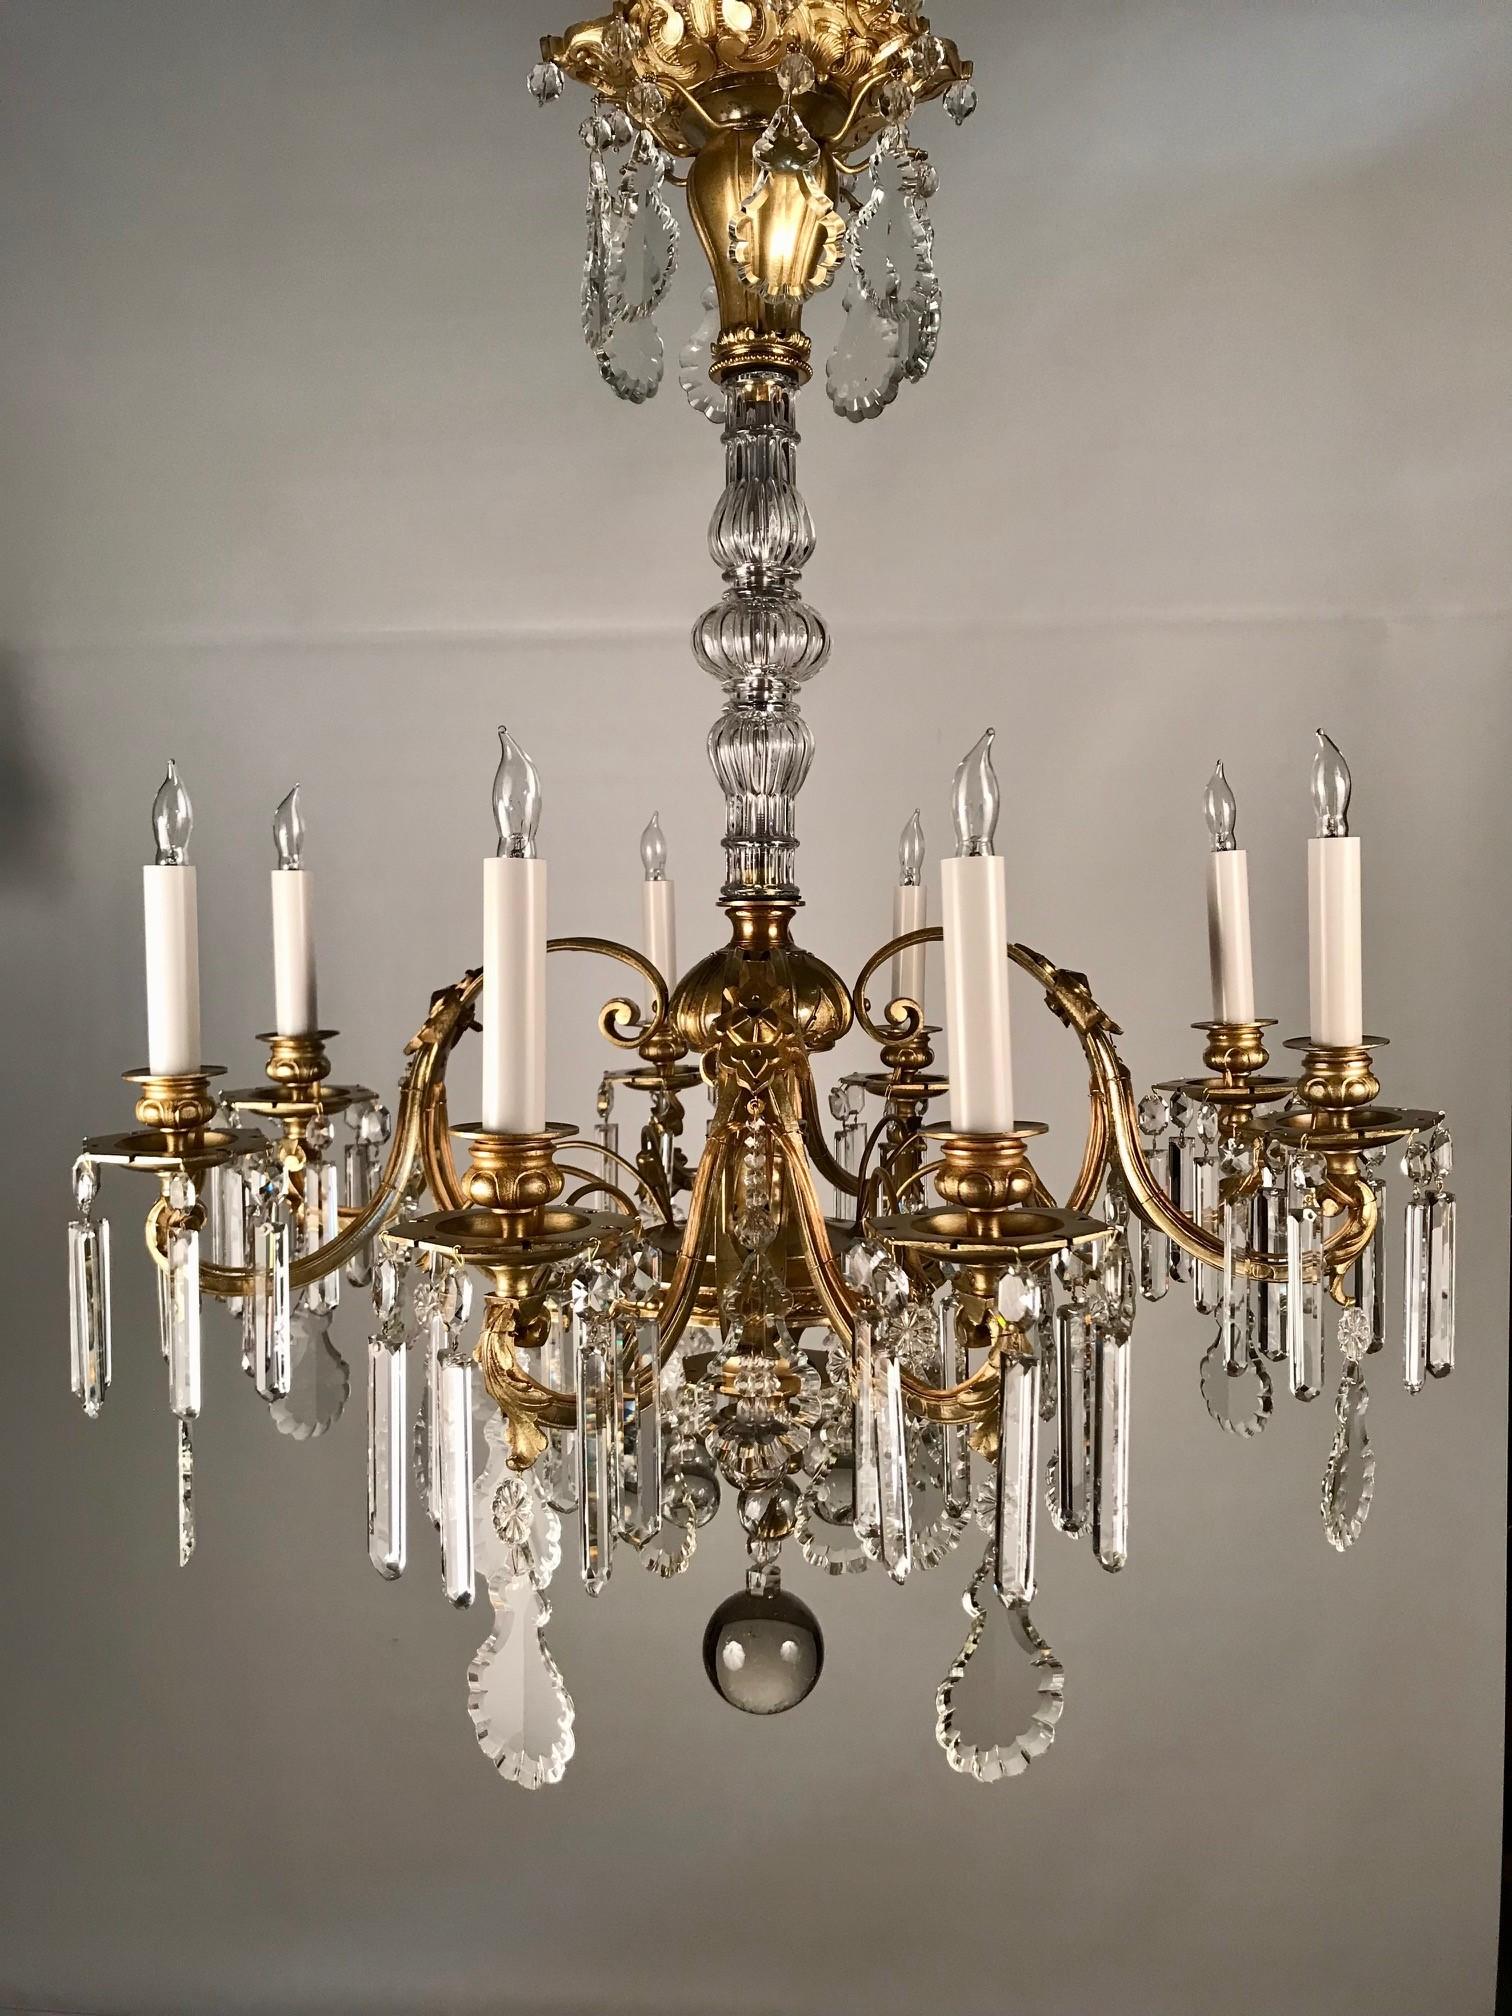 This elegant Louis XV style chandelier has scrolling arms applied with acanthus and mounted on a bronze central body. Unusually this has flower form short stems, from which are hung further cut ornaments. The central stem is sheathed in